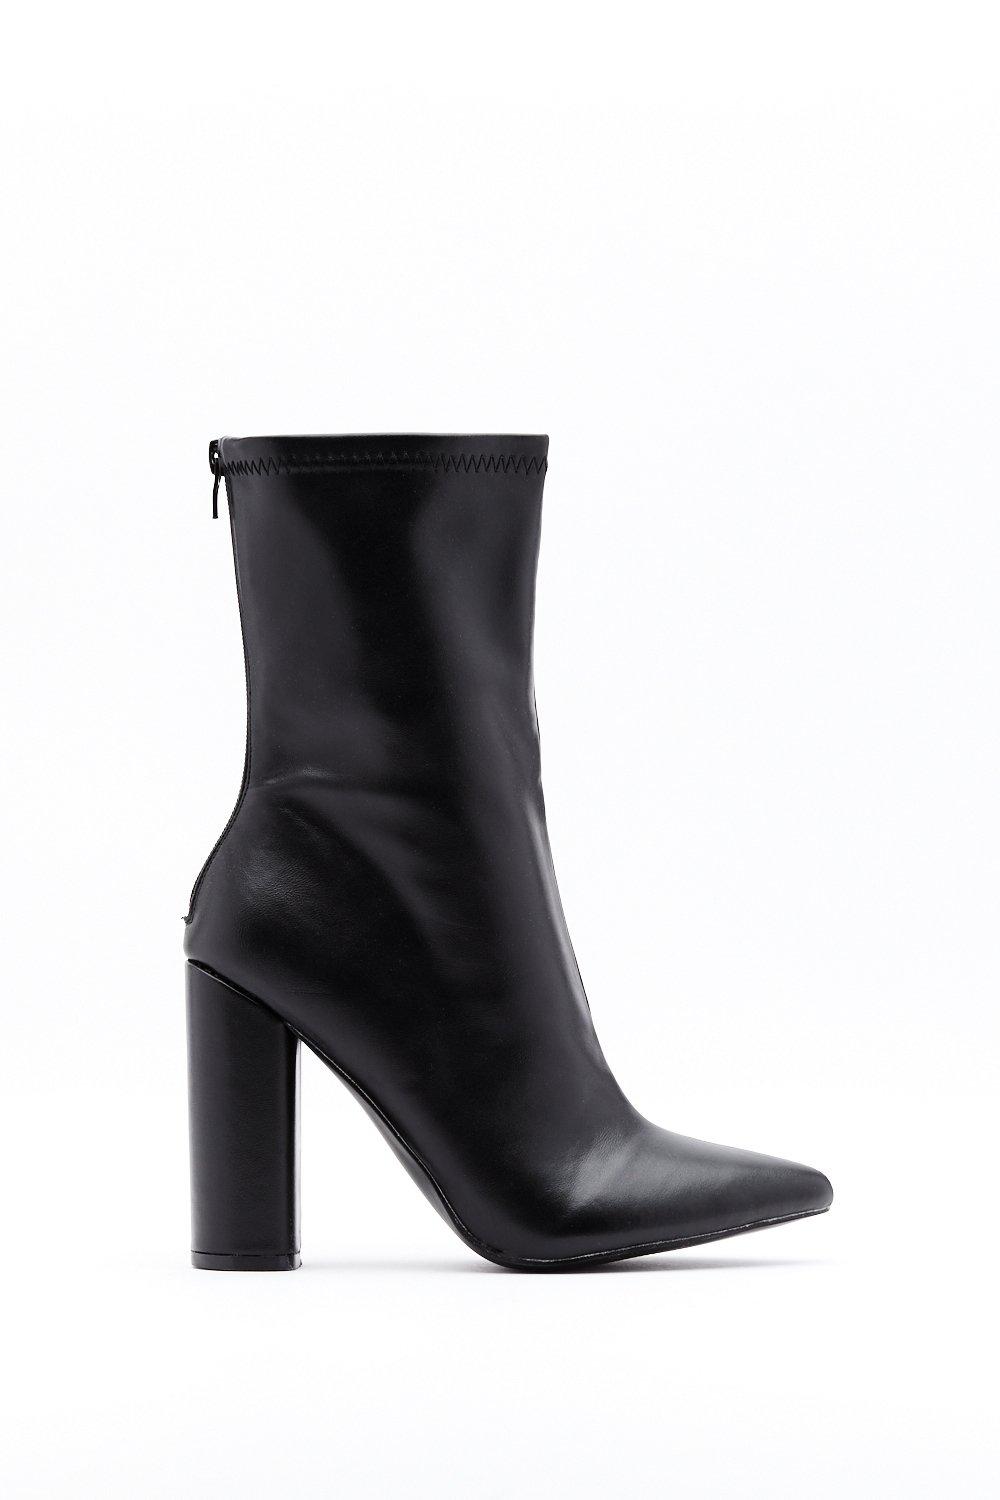 black pointed heeled boots